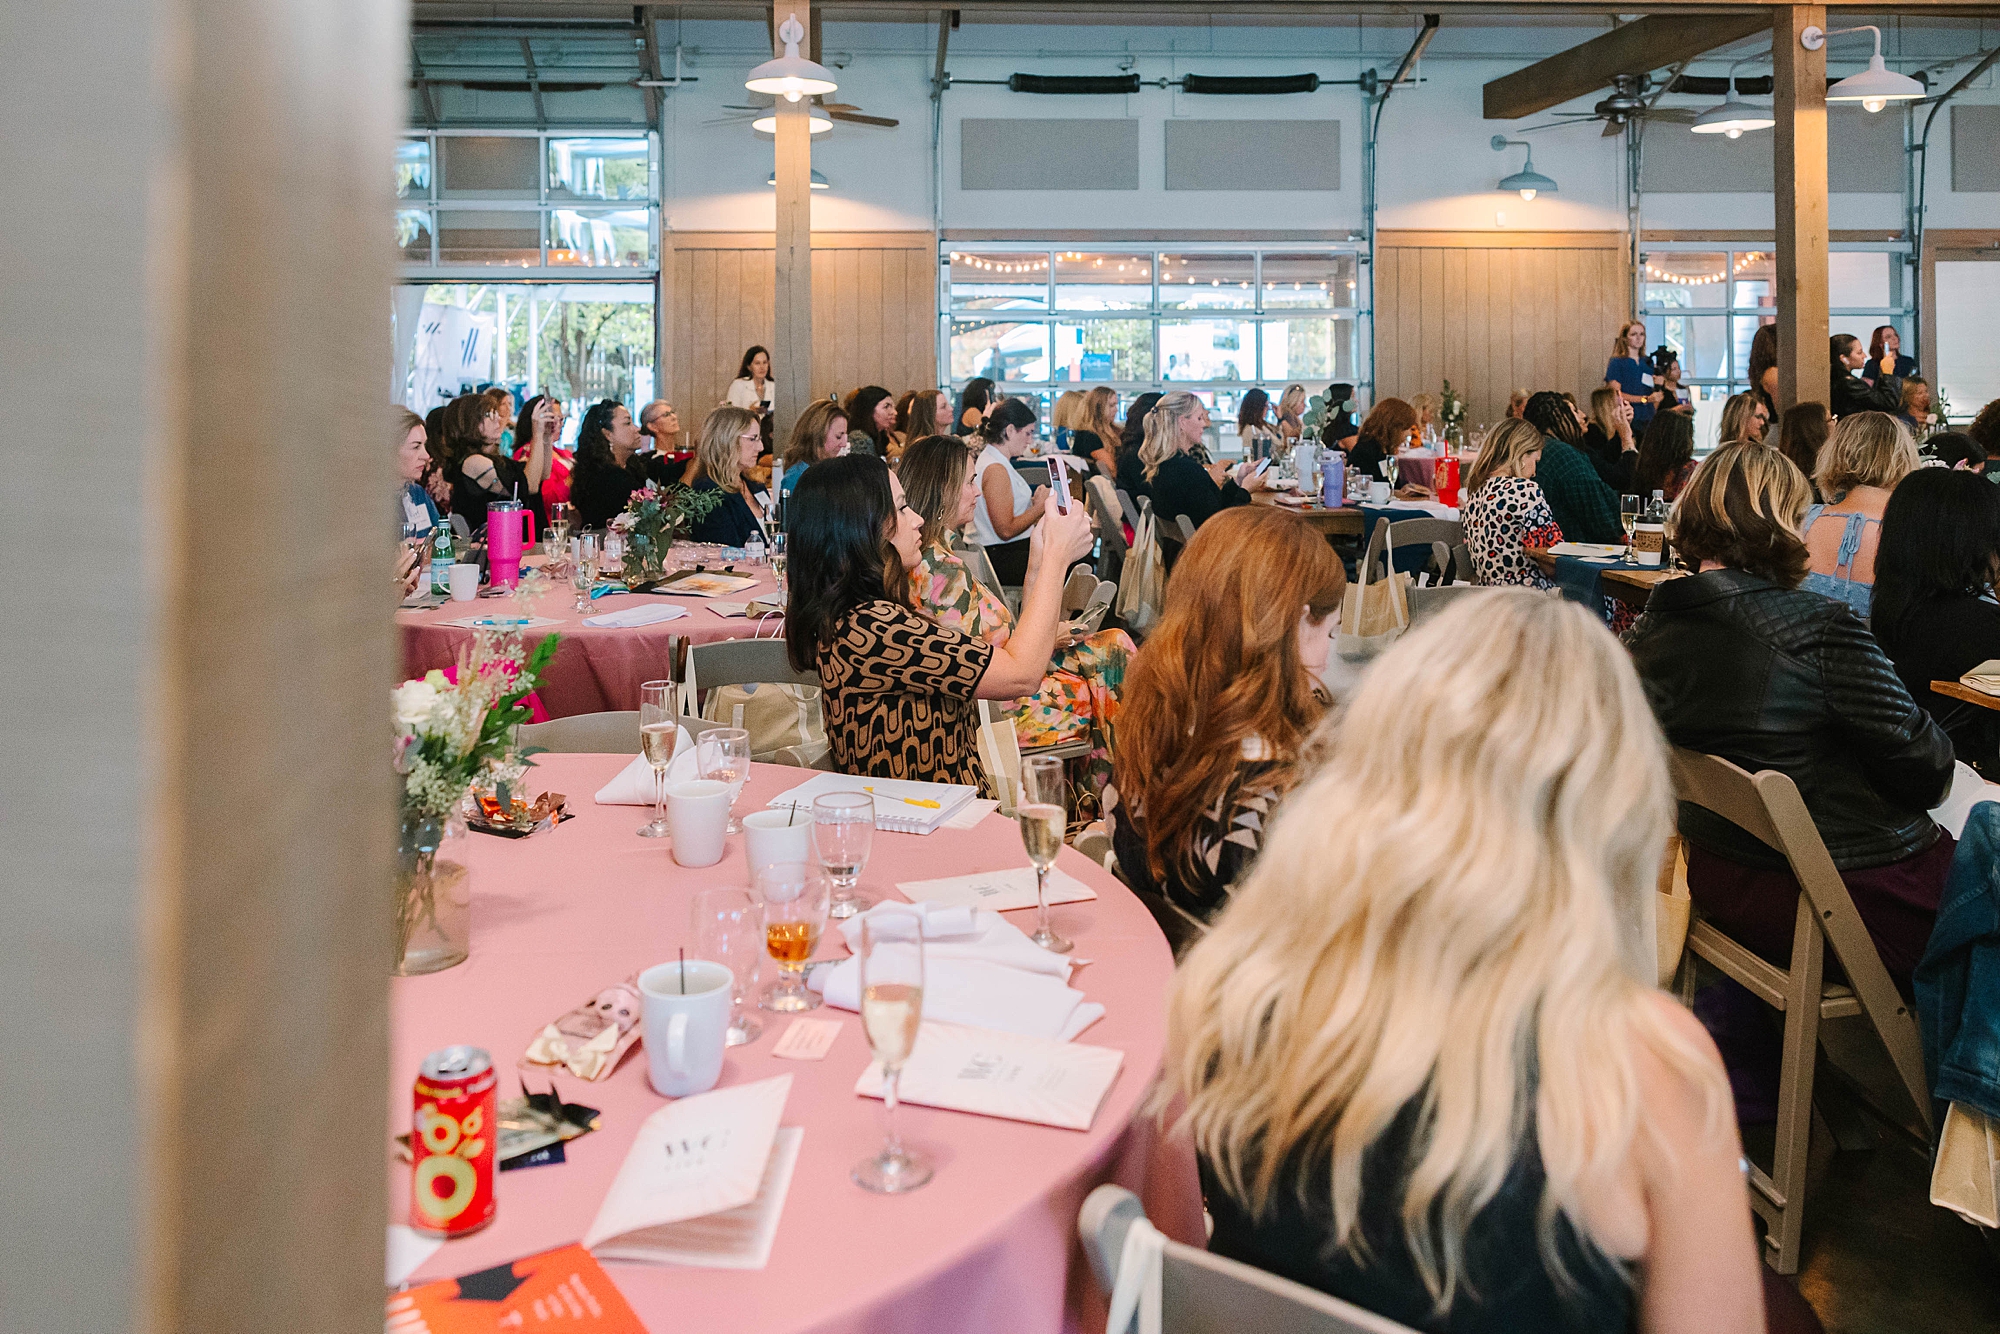 women listen to speakers sitting at tables with pink cloths